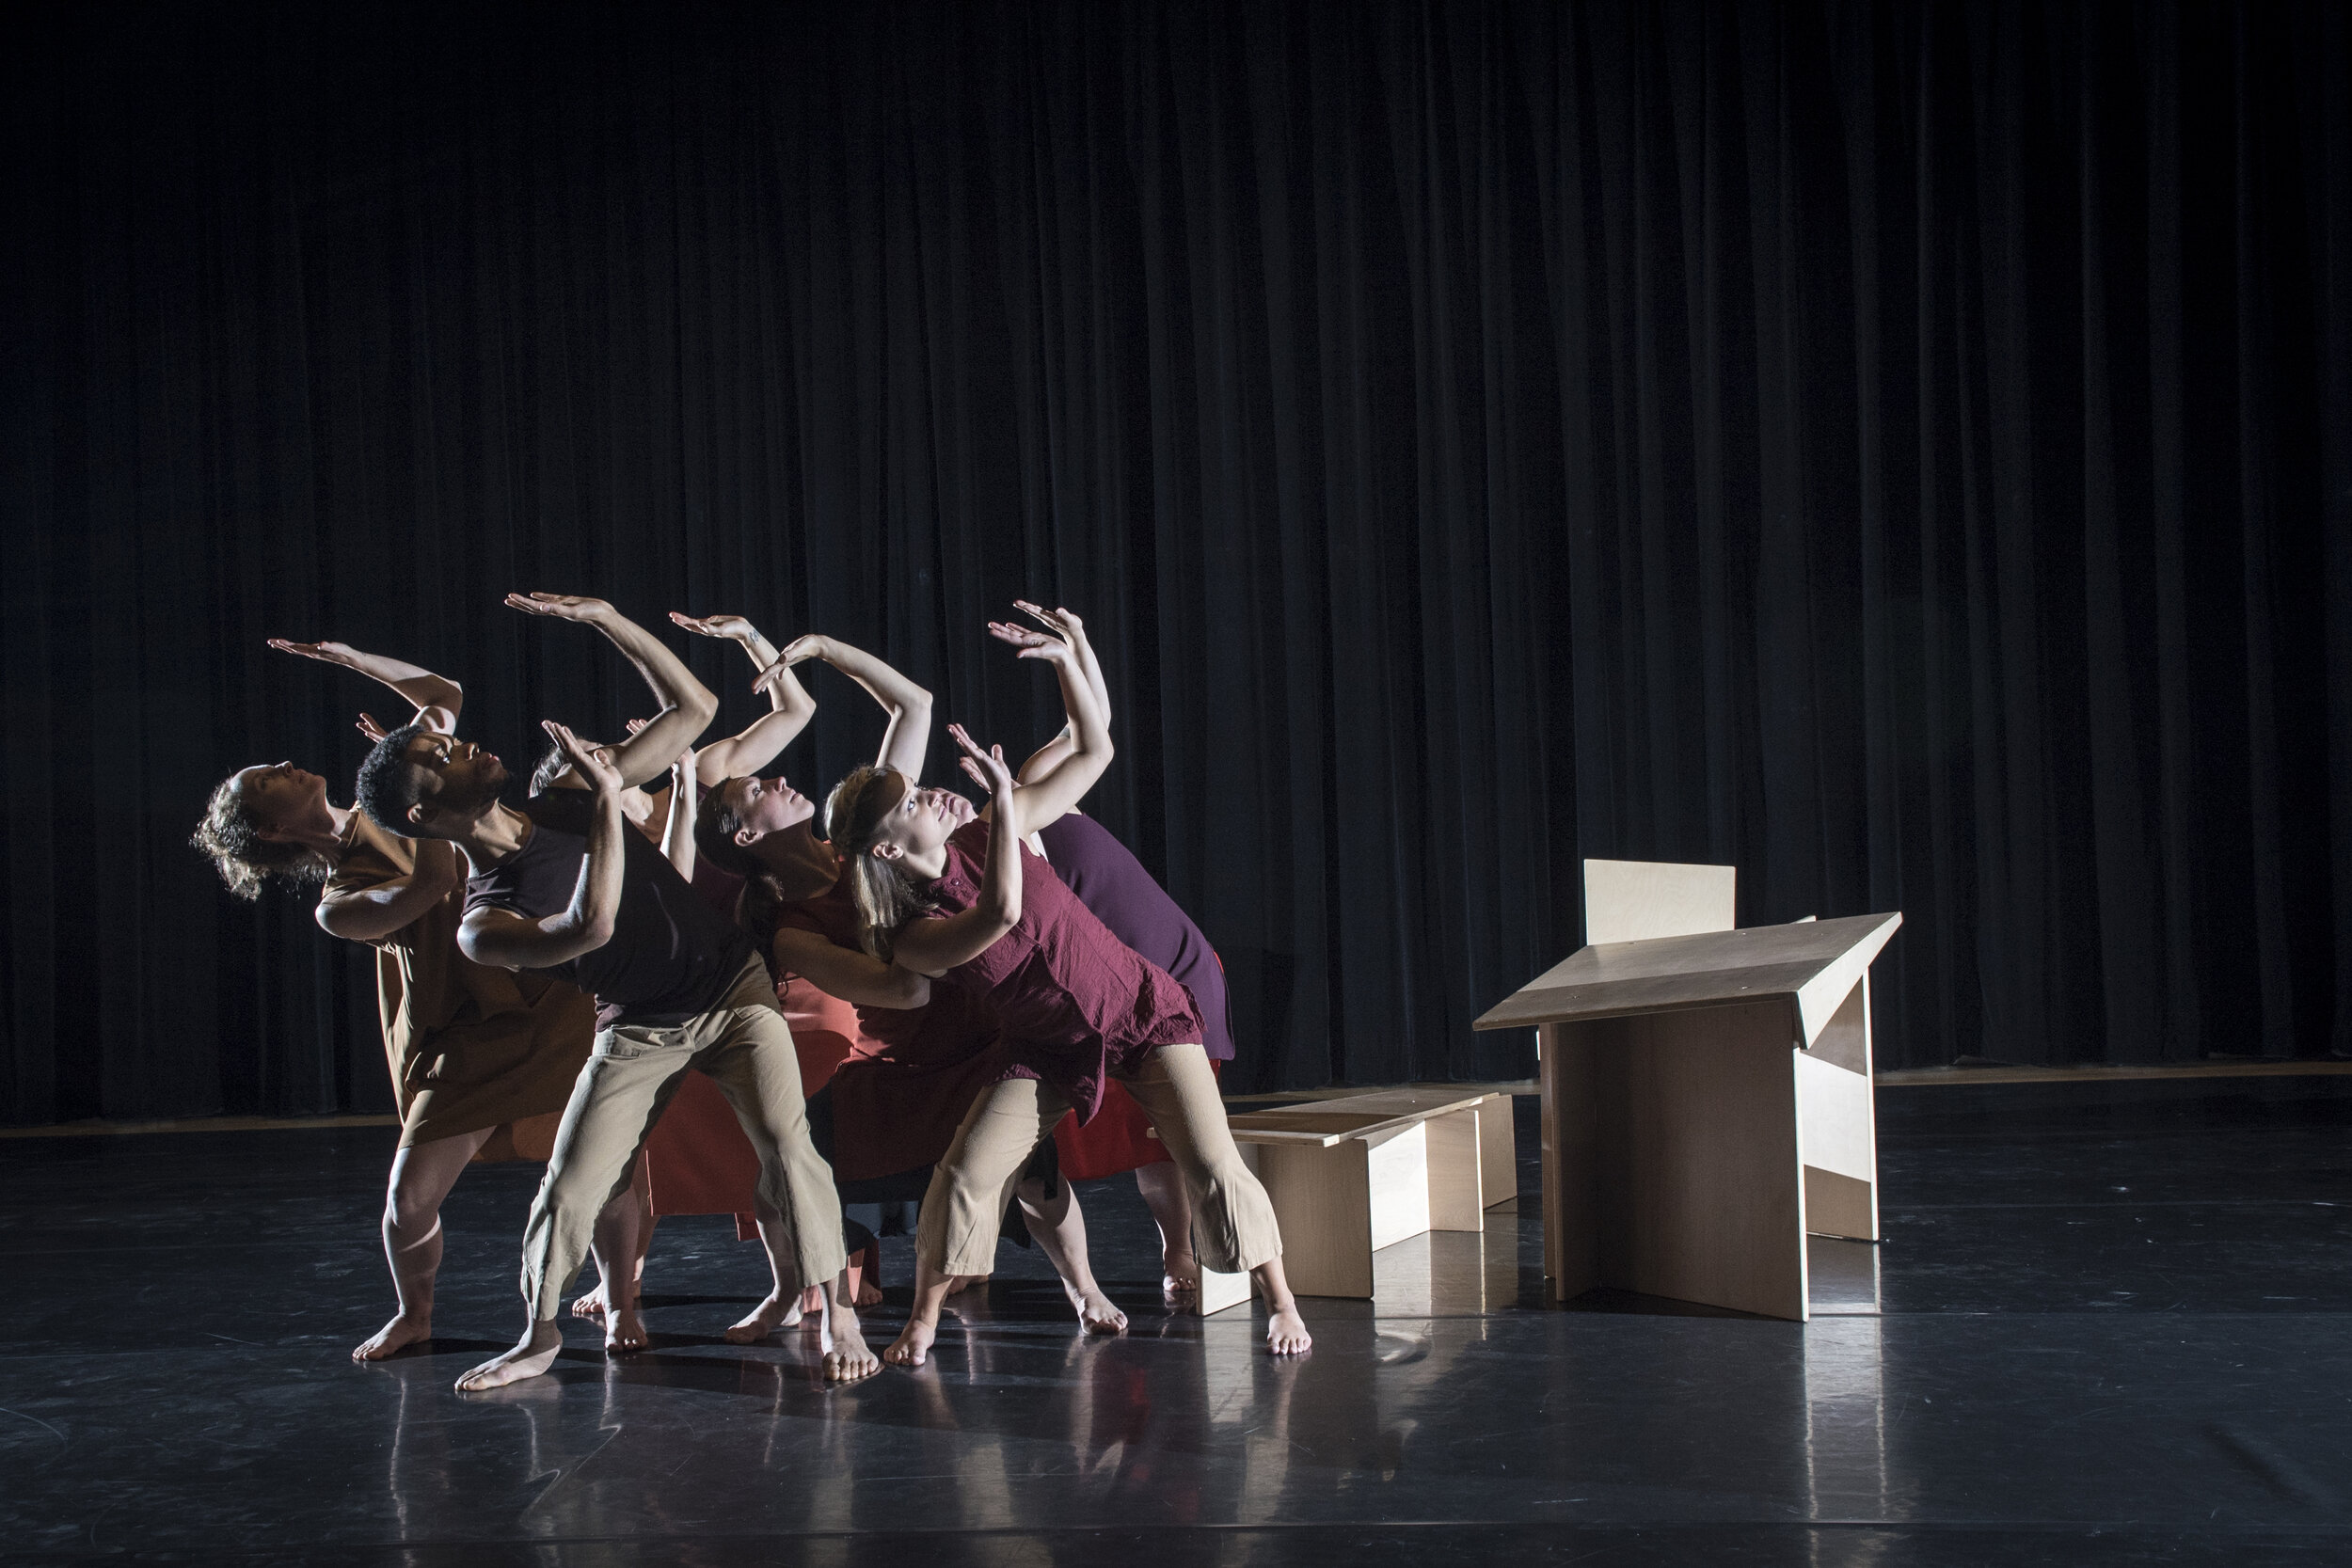 Company Dancers Group Performing with Two Boxes on Stage